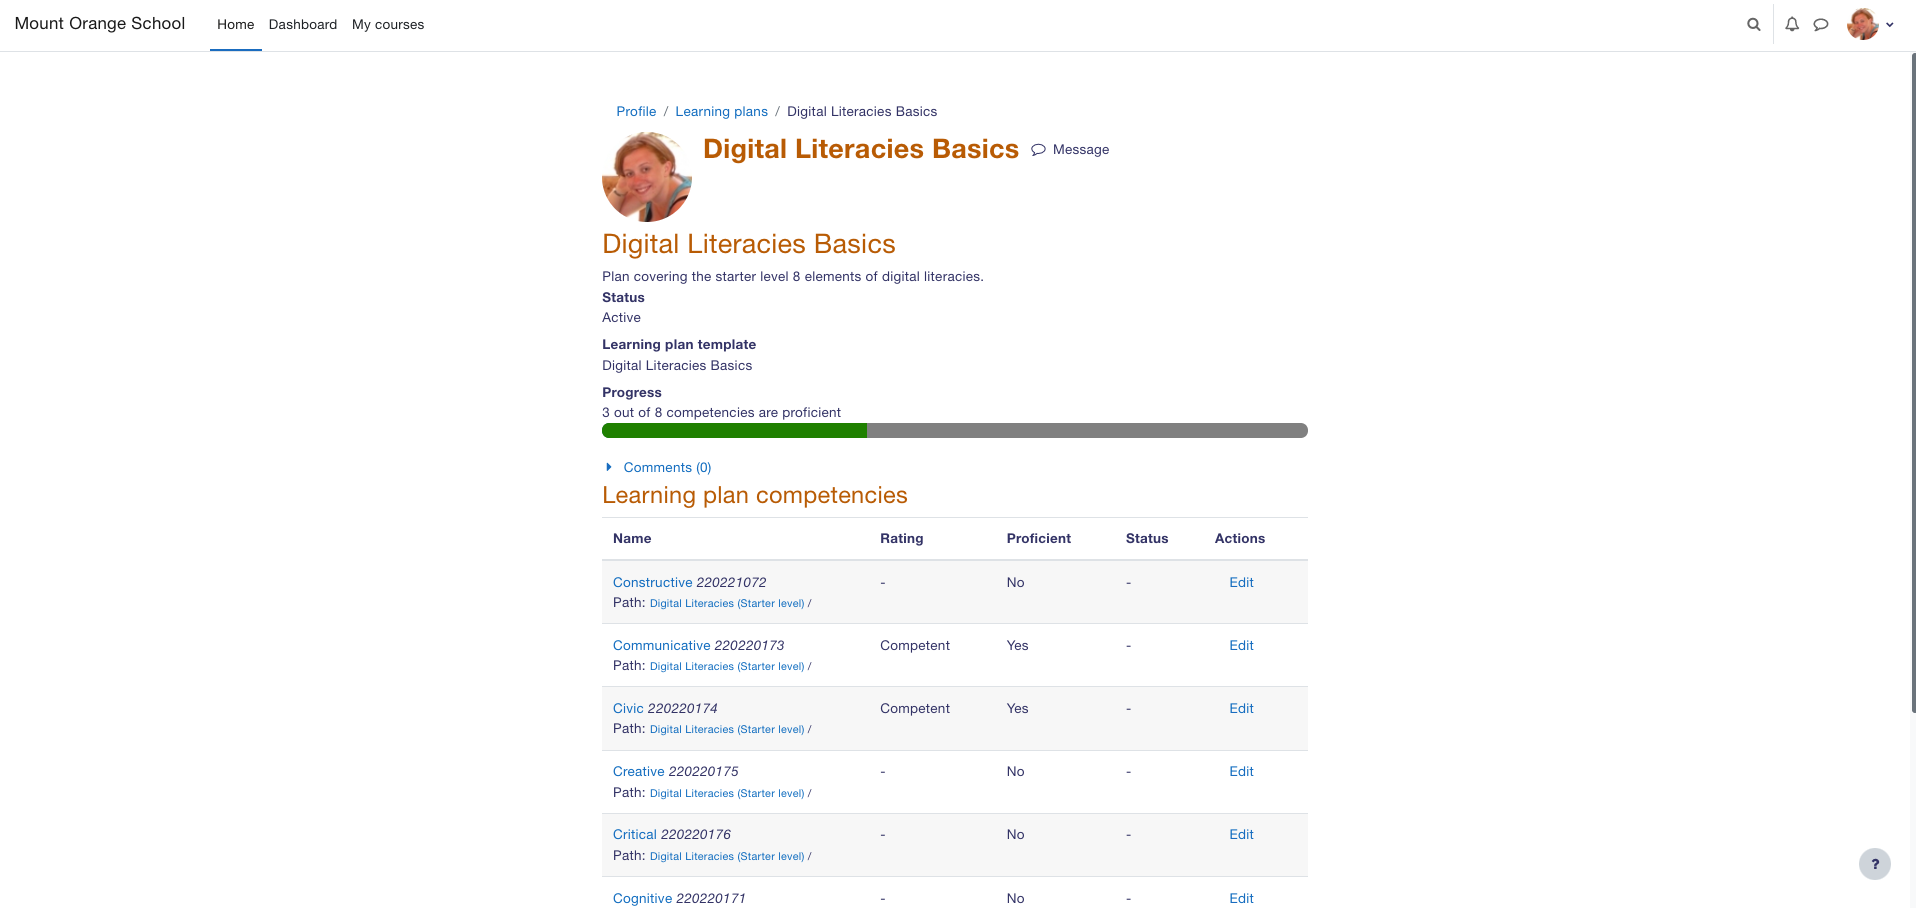 Moodle LMS Software - Learning plan student view